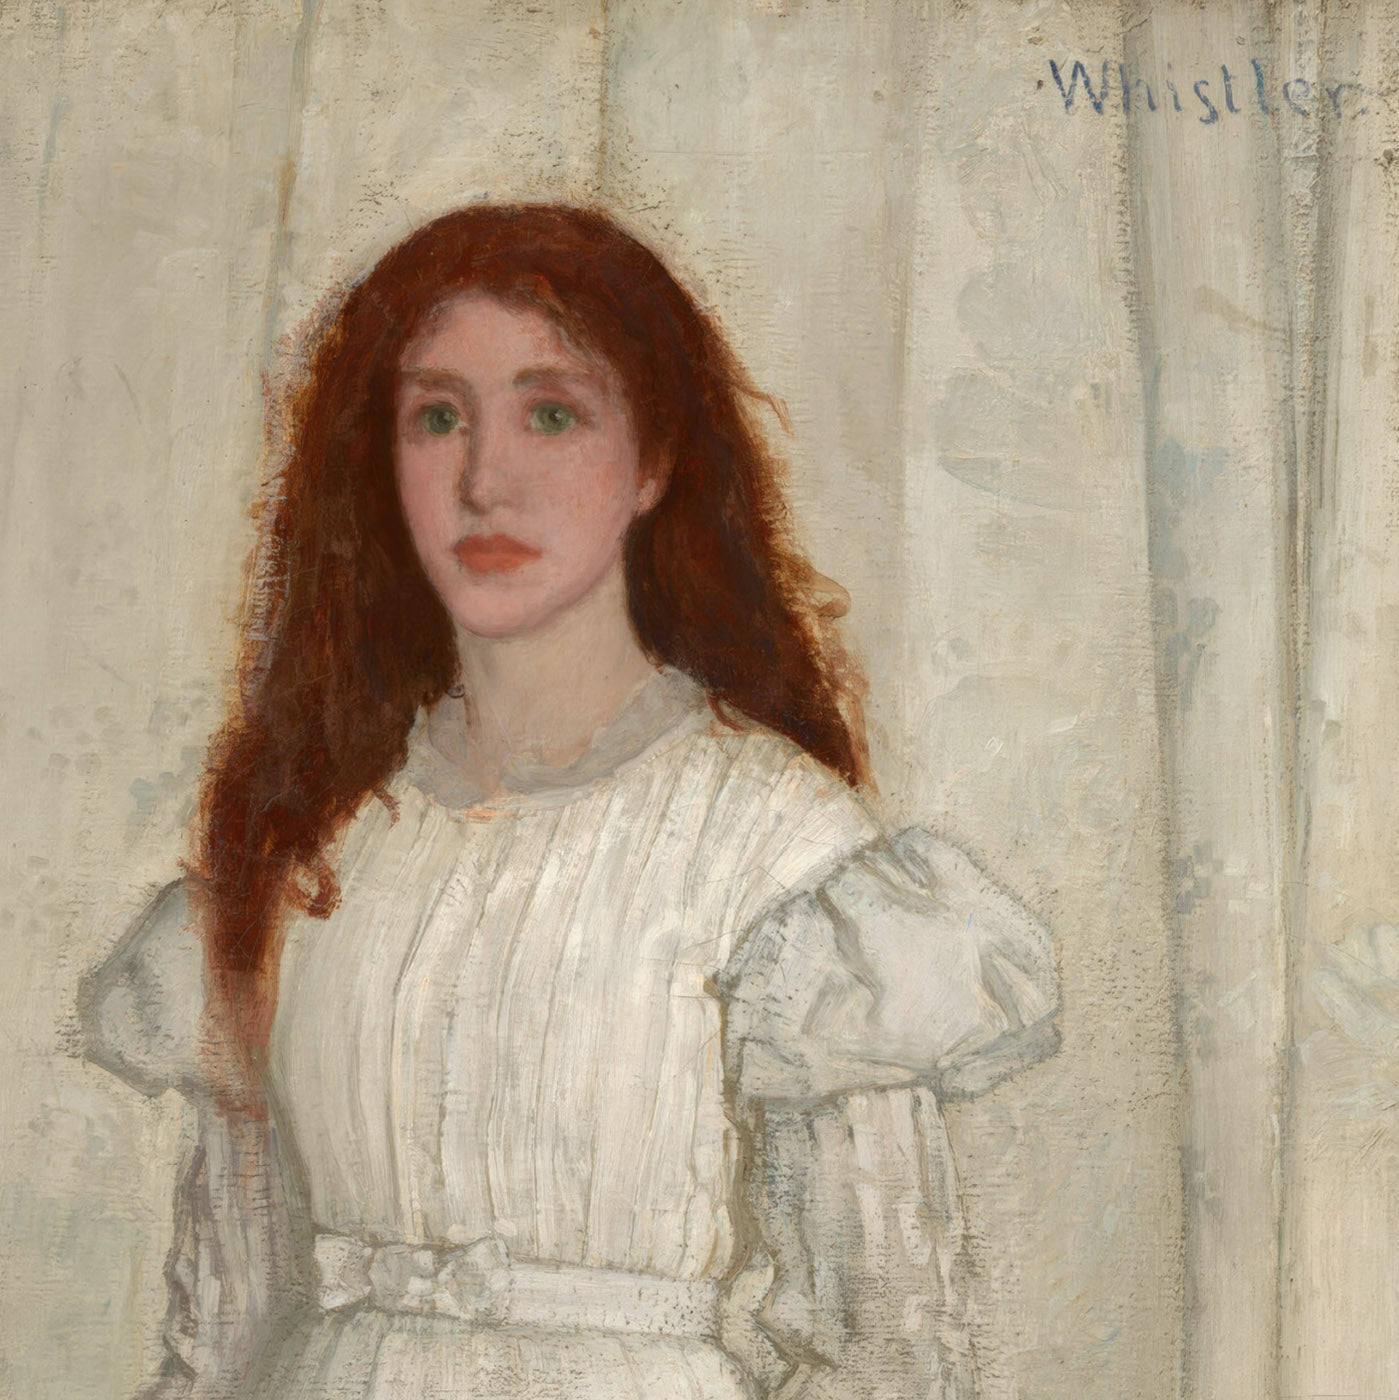 Whistler Exhibition Poster - 'Symphony in White No. 1: The White Girl'